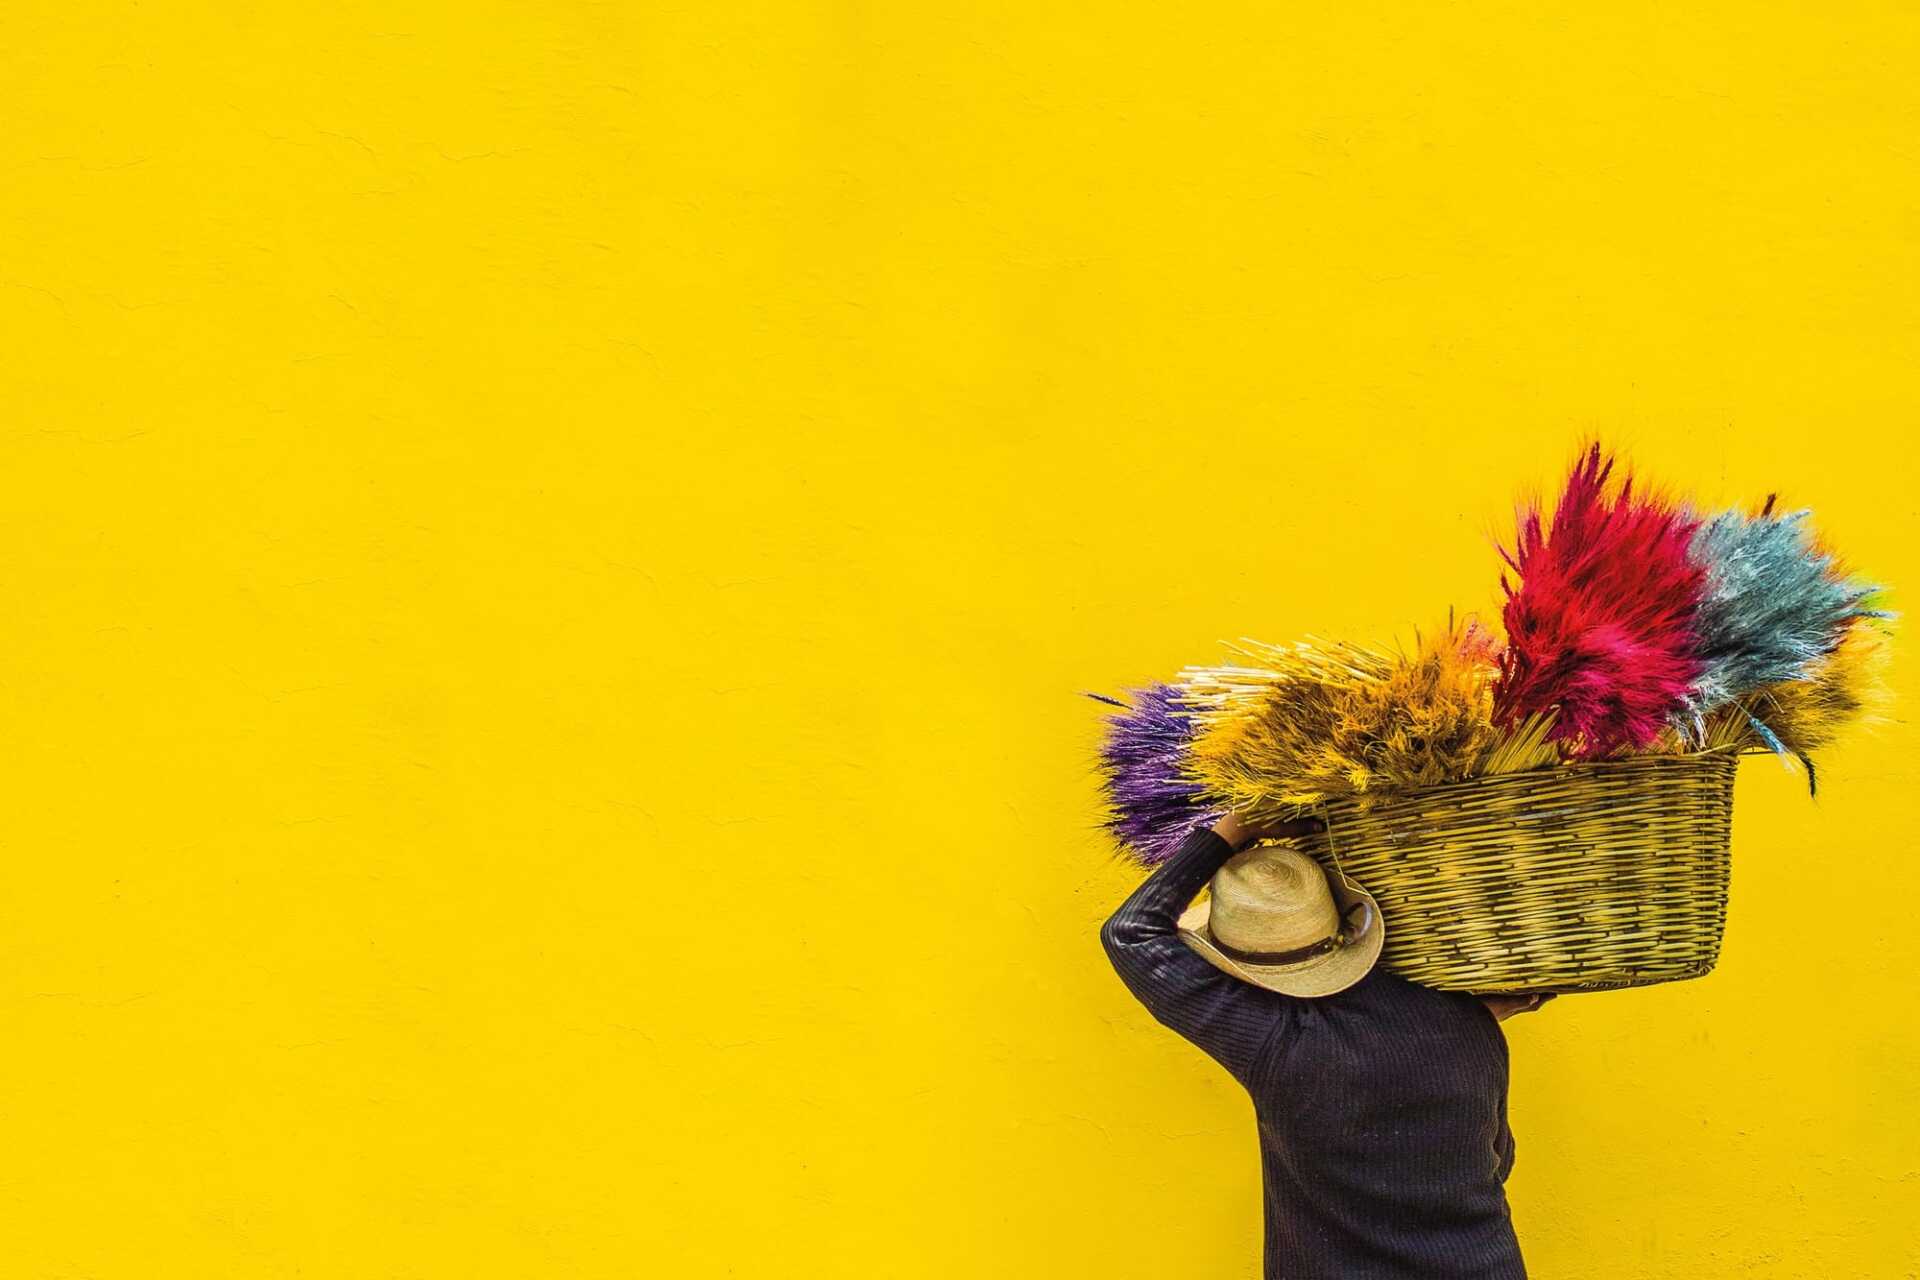 Man facing away from us, with hat against a yellow wall. He's carrying a basket of brightly coloured flowers.